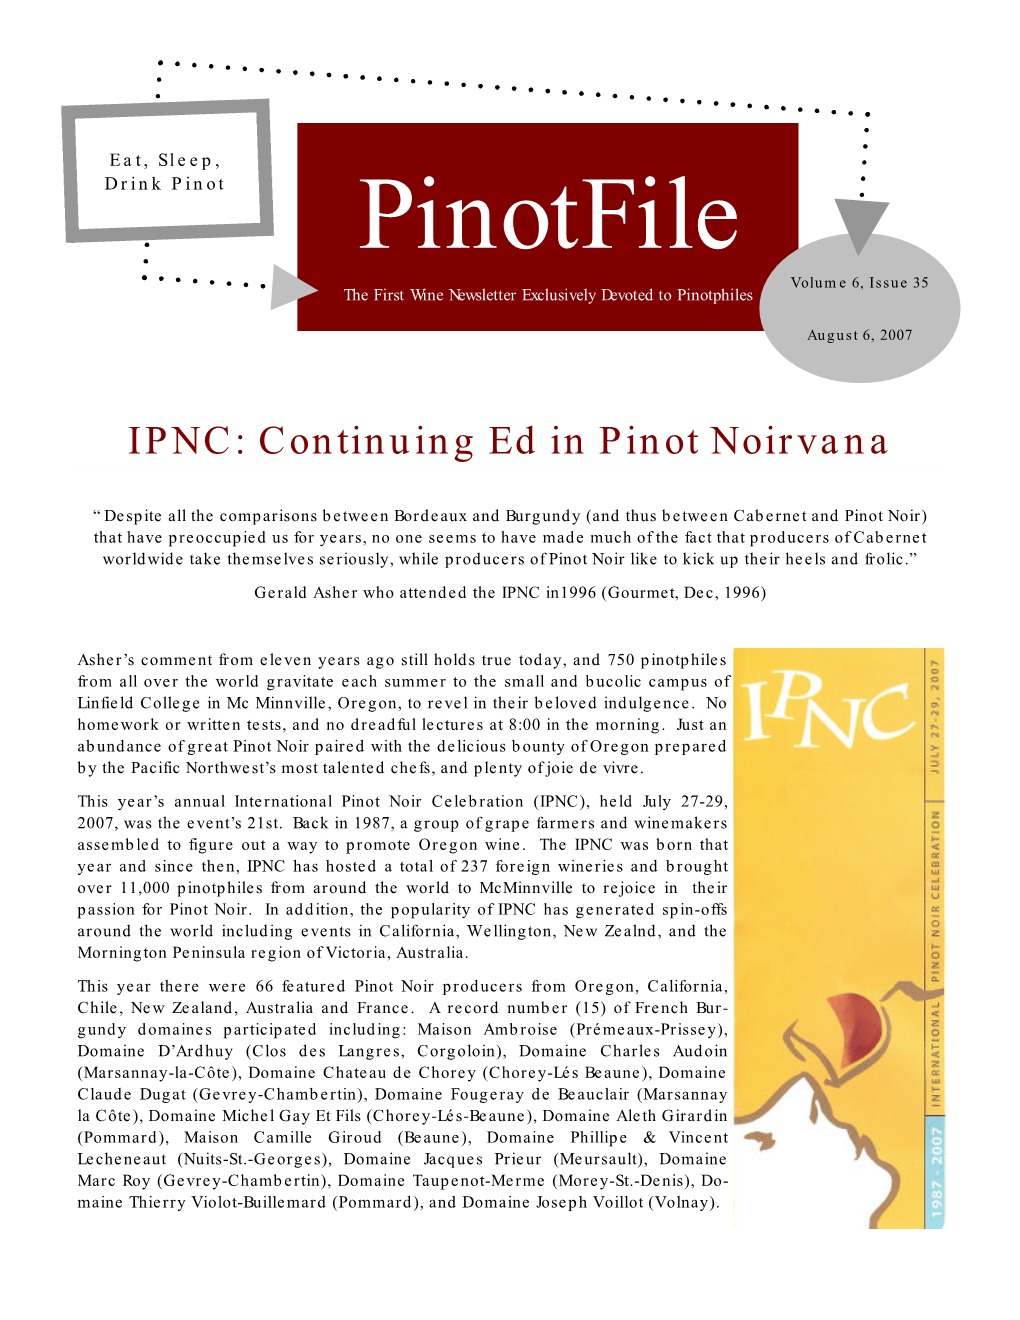 Pinotfile Vol 6, Issue 35